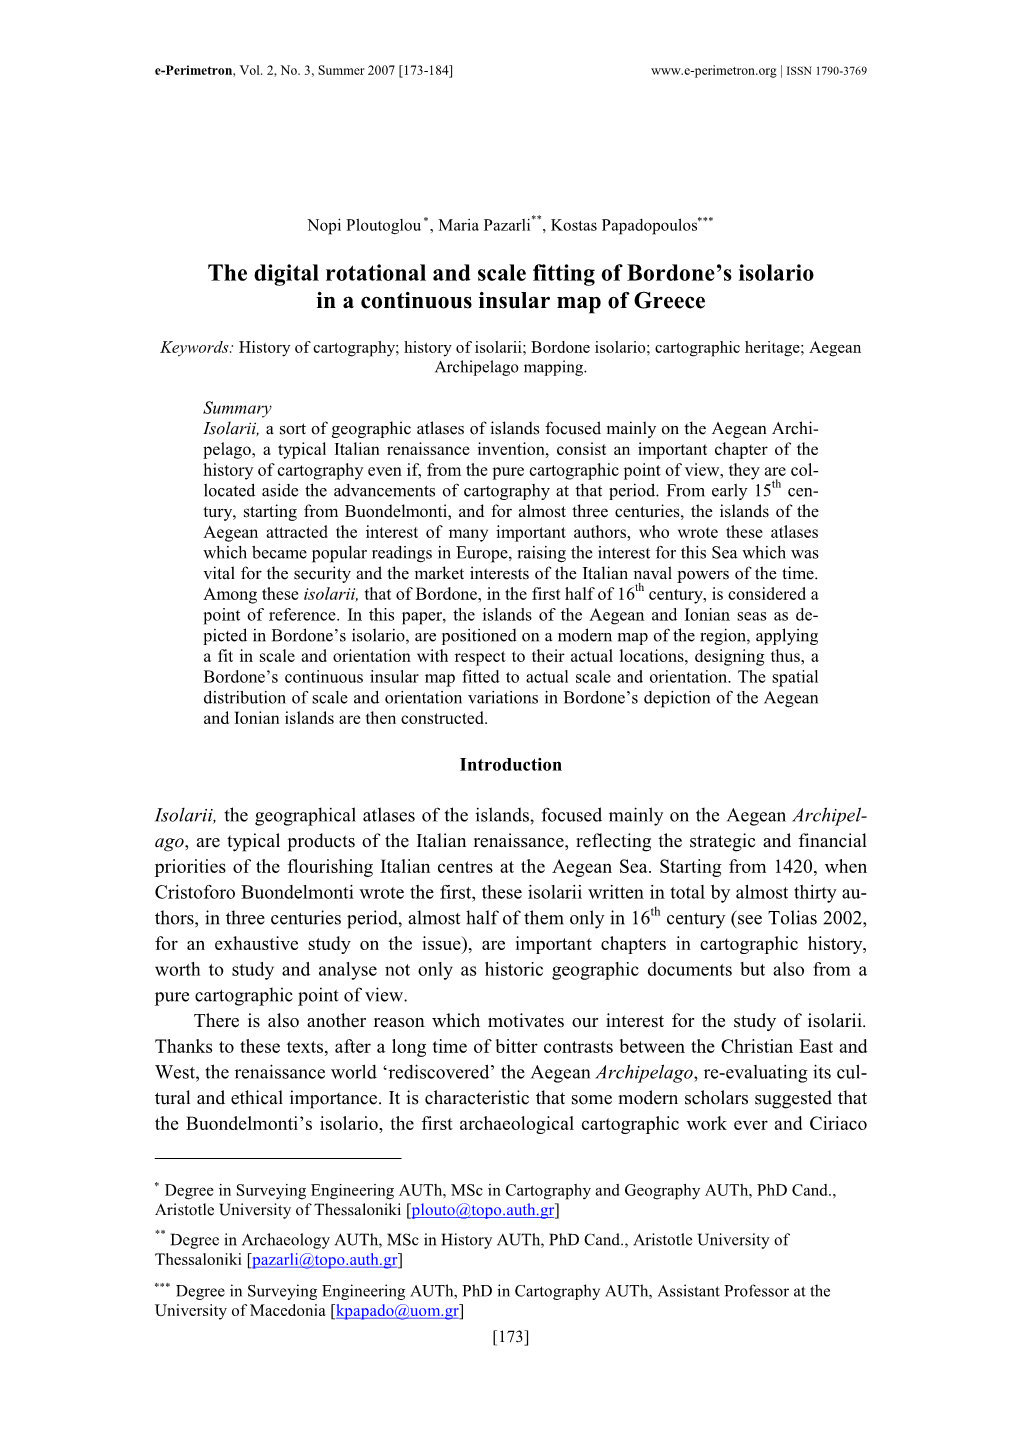 The Digital Rotational and Scale Fitting of Bordone's Isolario in A